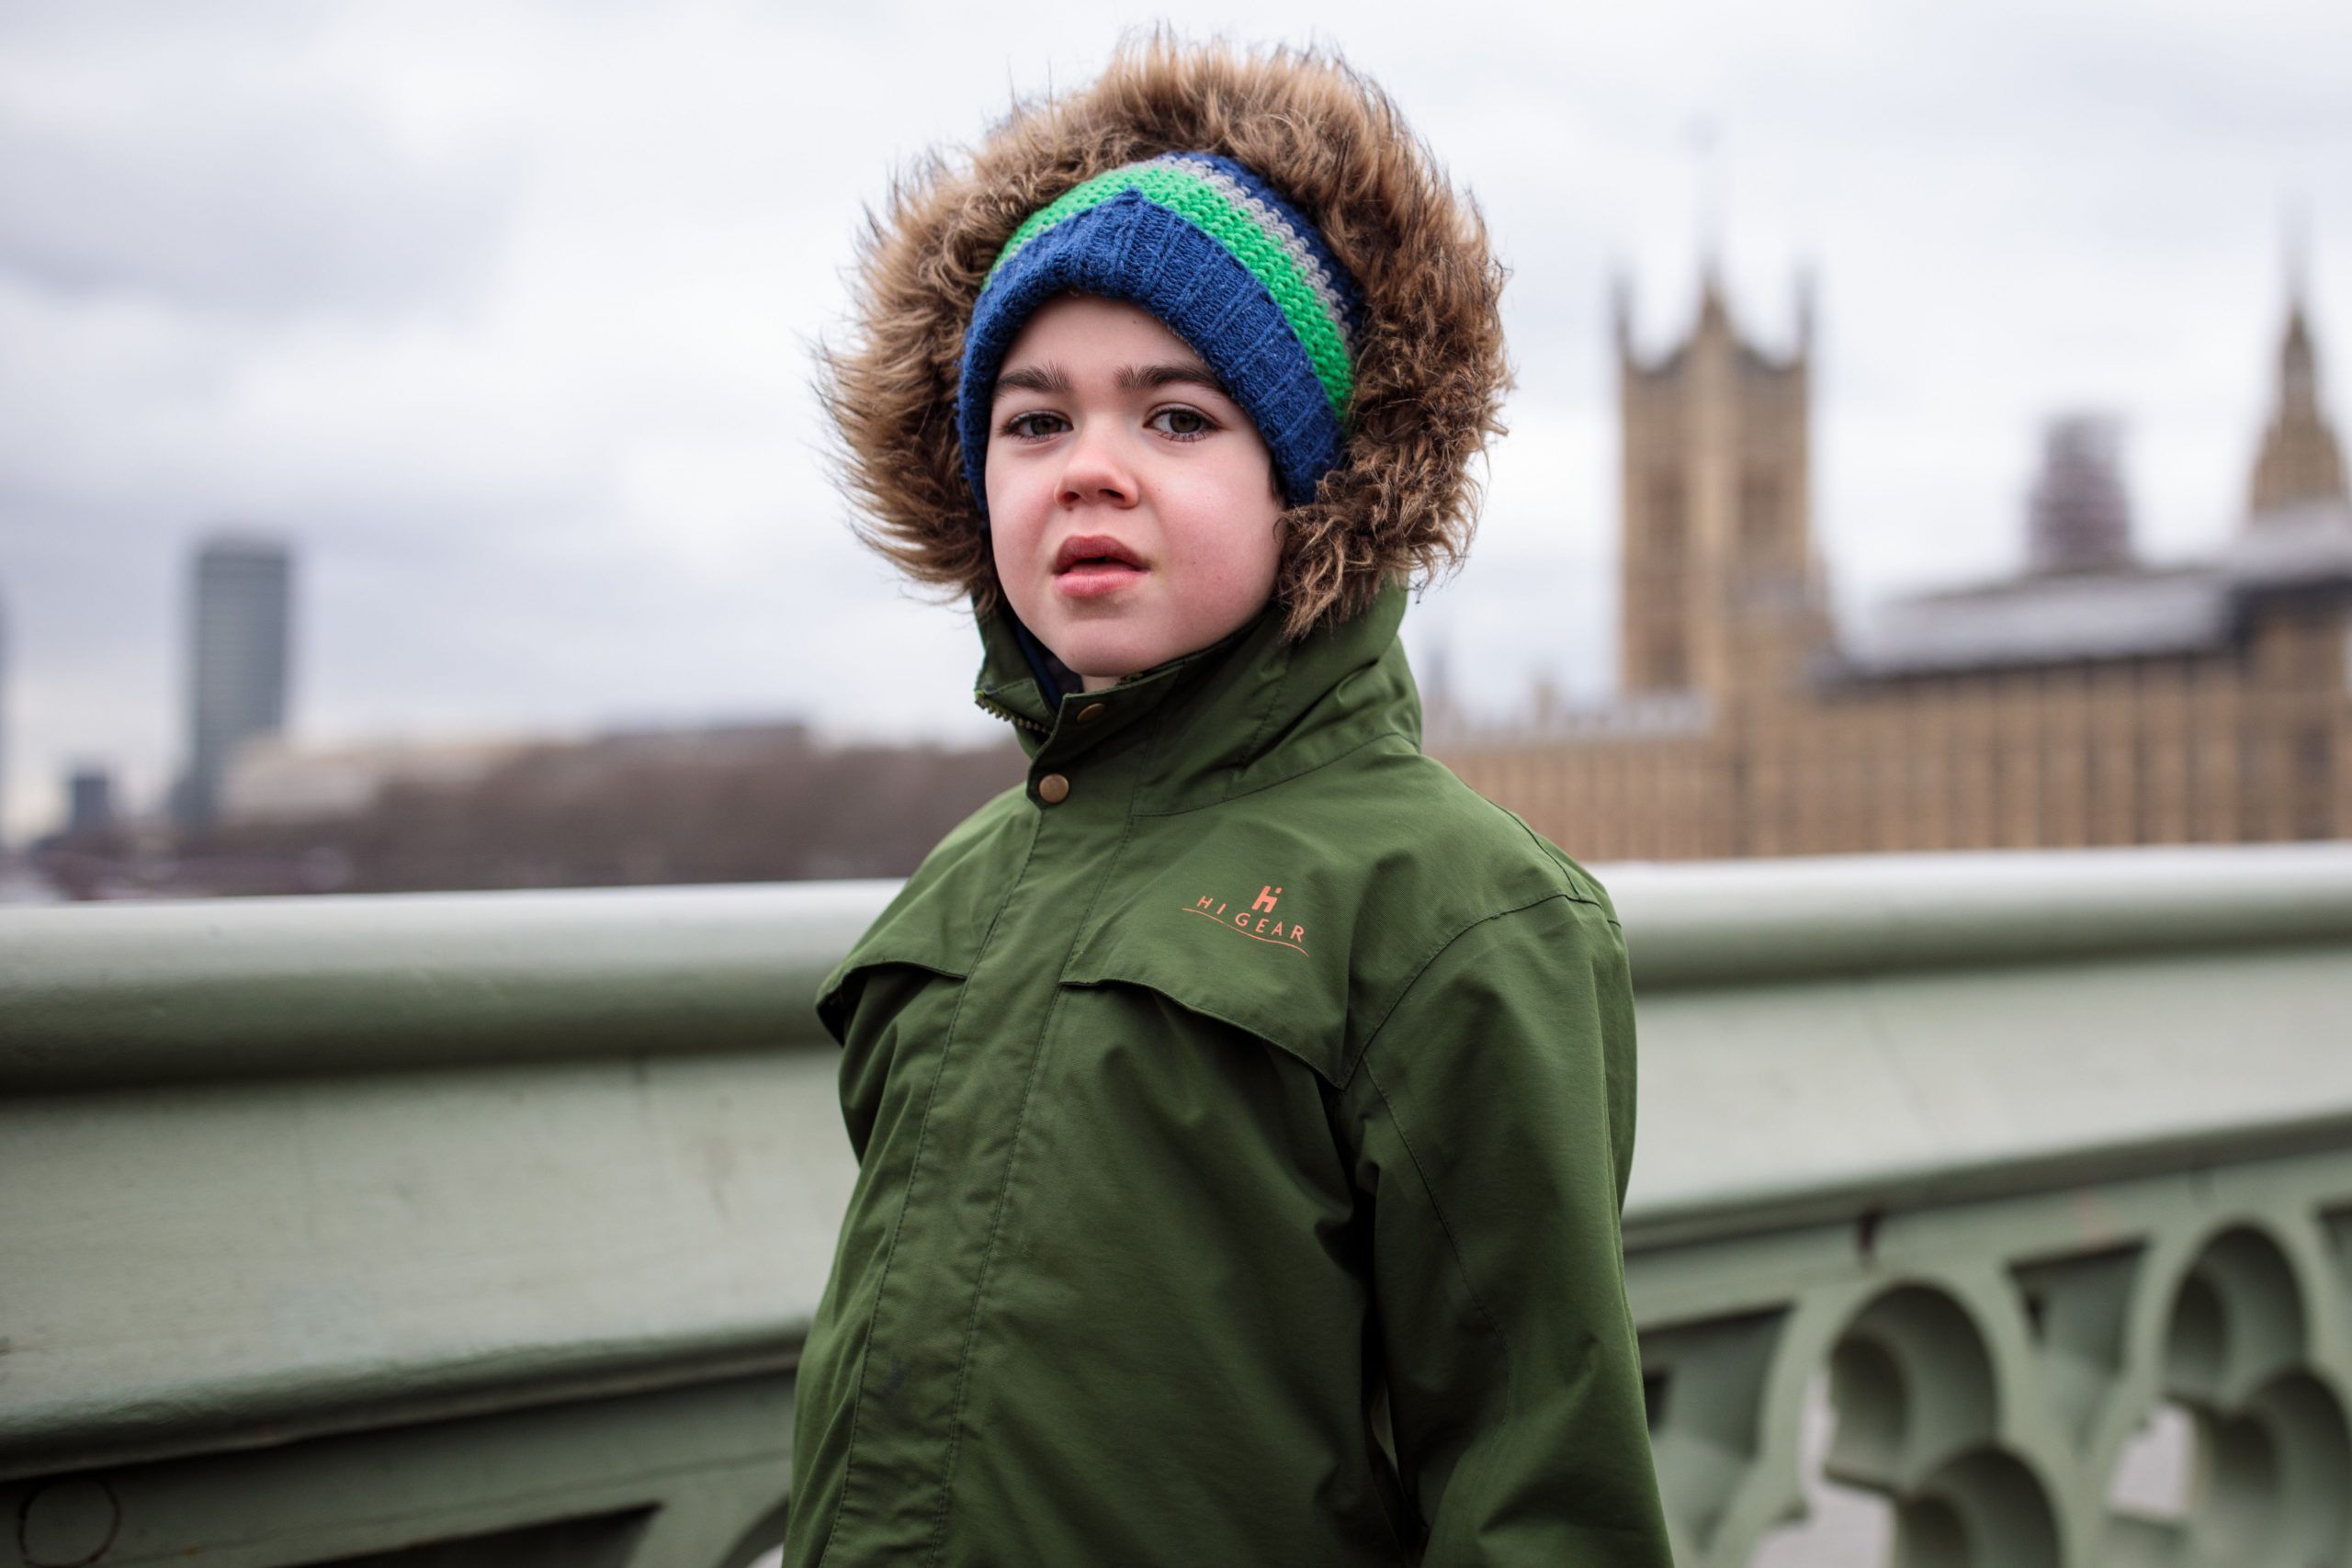 LONDON, ENGLAND - MARCH 20: Six-year-old Alfie Dingley poses on Westminster Bridge. (Photo by Jack Taylor/Getty Images)